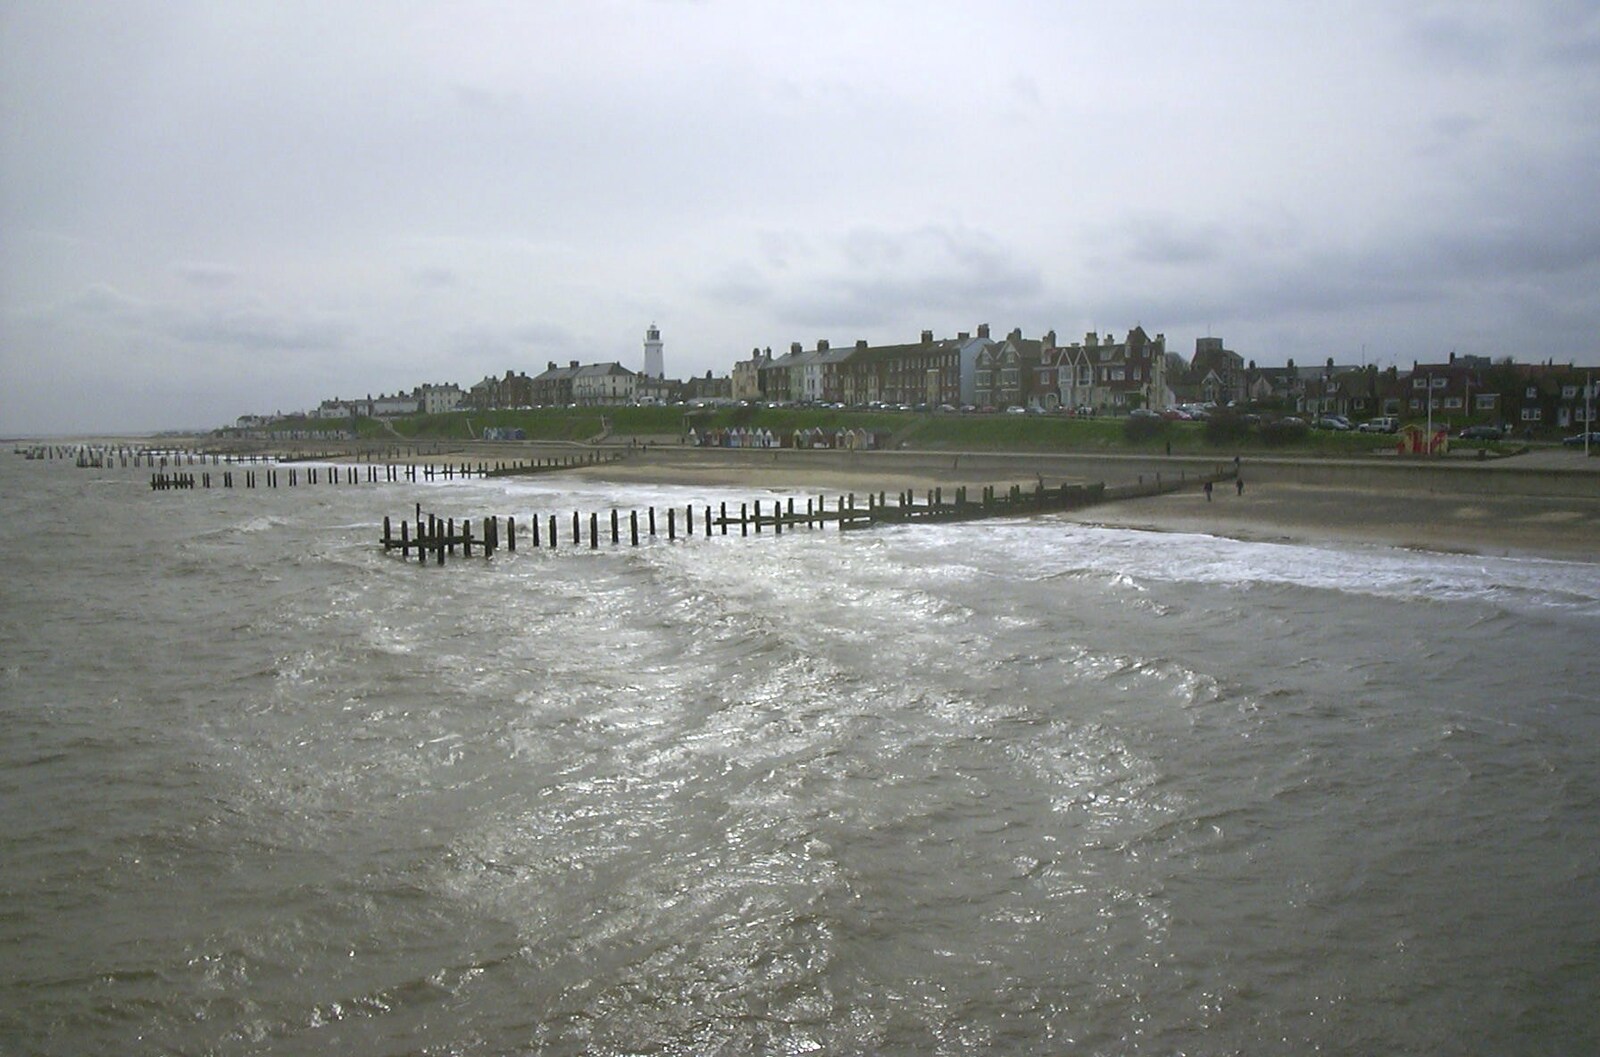 A view of Southwold from the pier from Moping in Southwold, Suffolk - 3rd April 2004